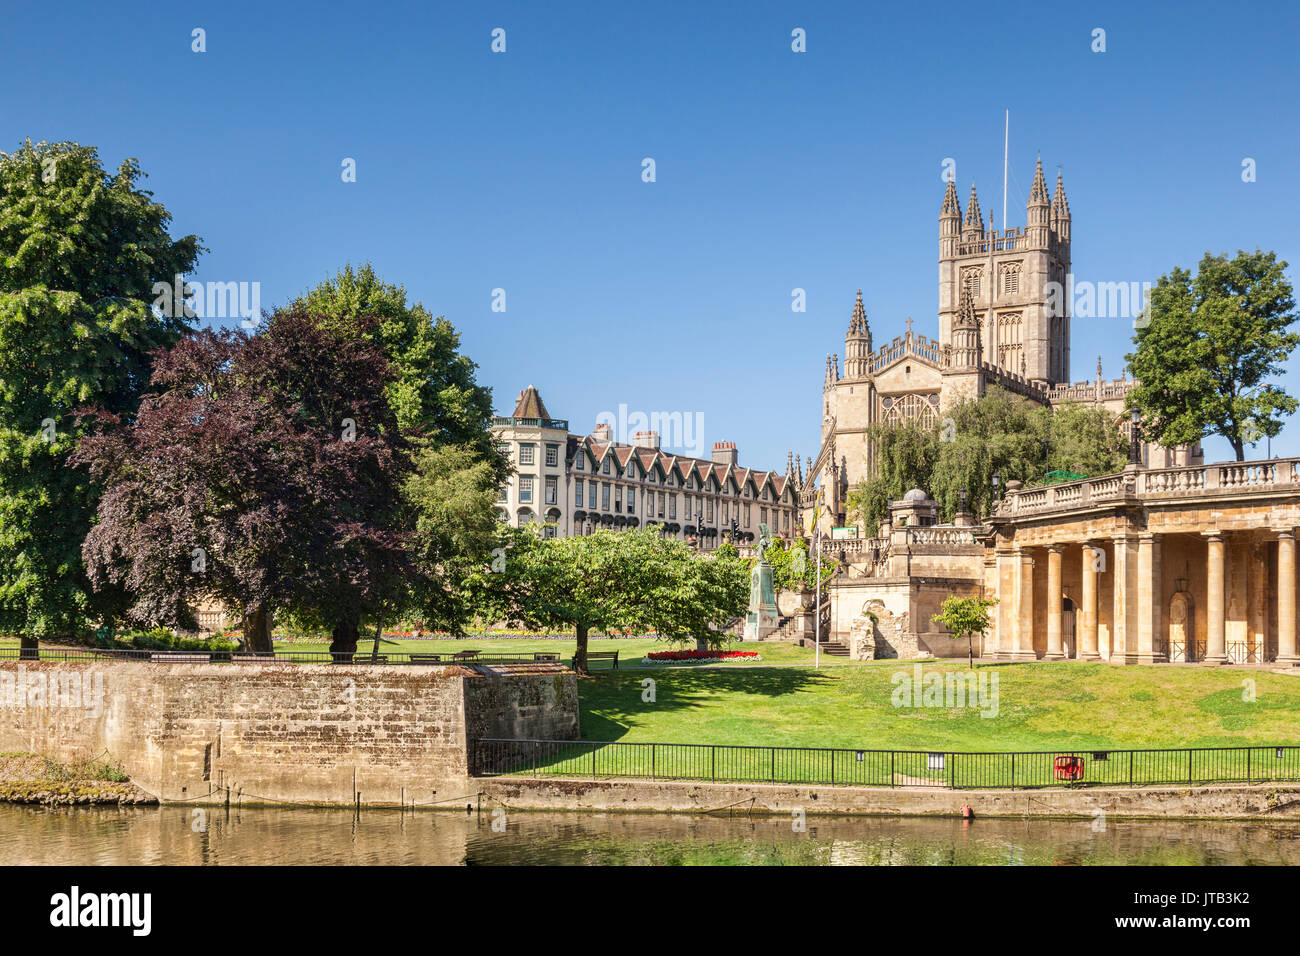 Bath Abbey and the Orangerie on the banks of the River Avon, on a beautiful summer morning with perfectly clear blue sky. Bath, Somerset, England, UK Stock Photo